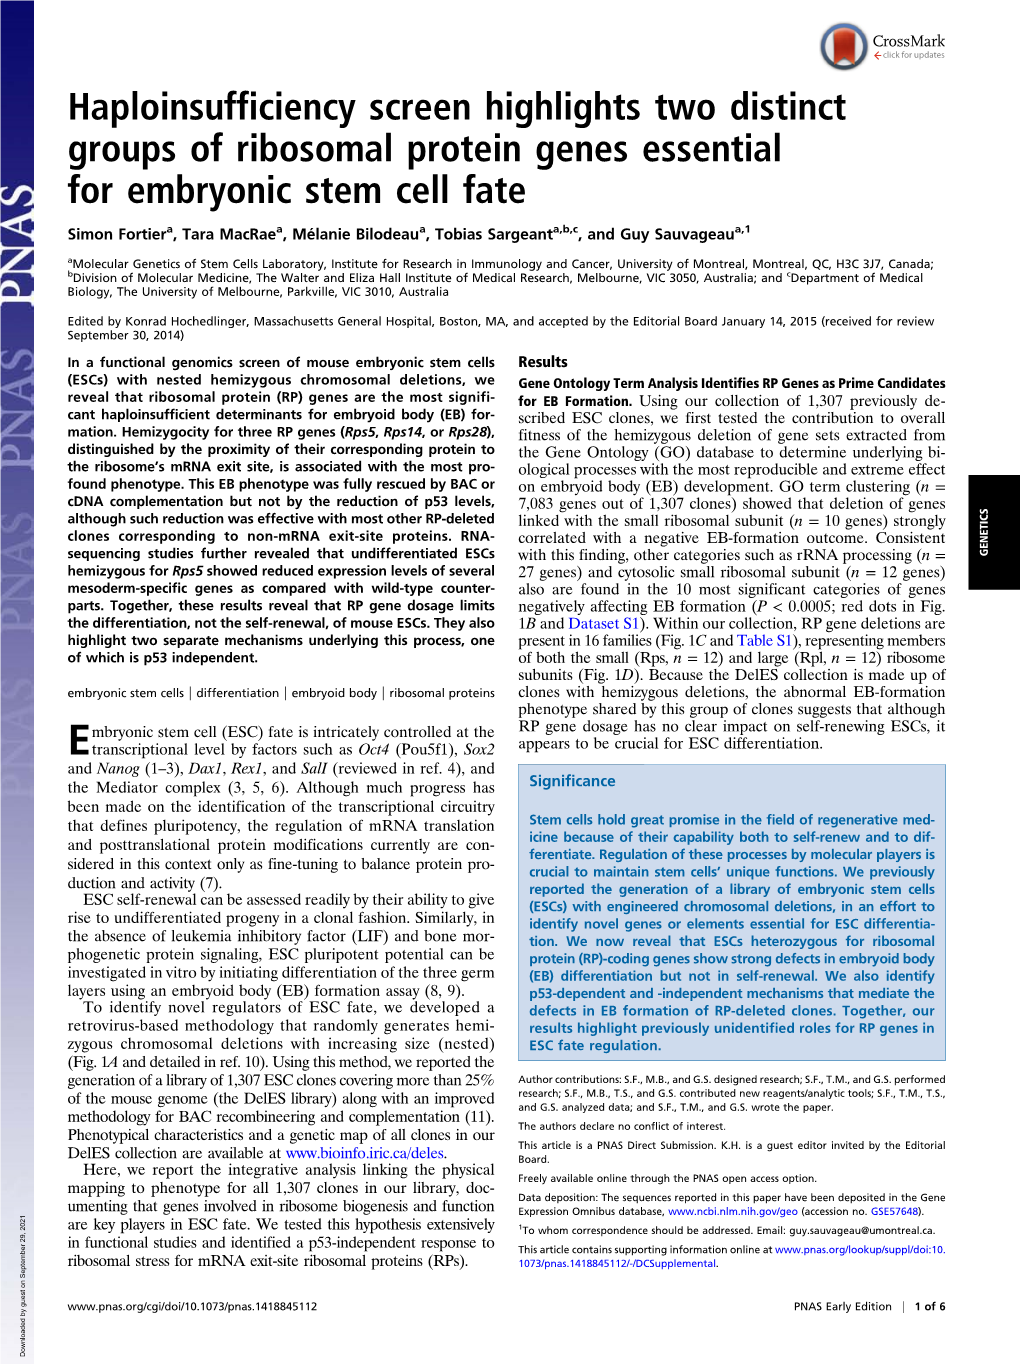 Haploinsufficiency Screen Highlights Two Distinct Groups of Ribosomal Protein Genes Essential for Embryonic Stem Cell Fate